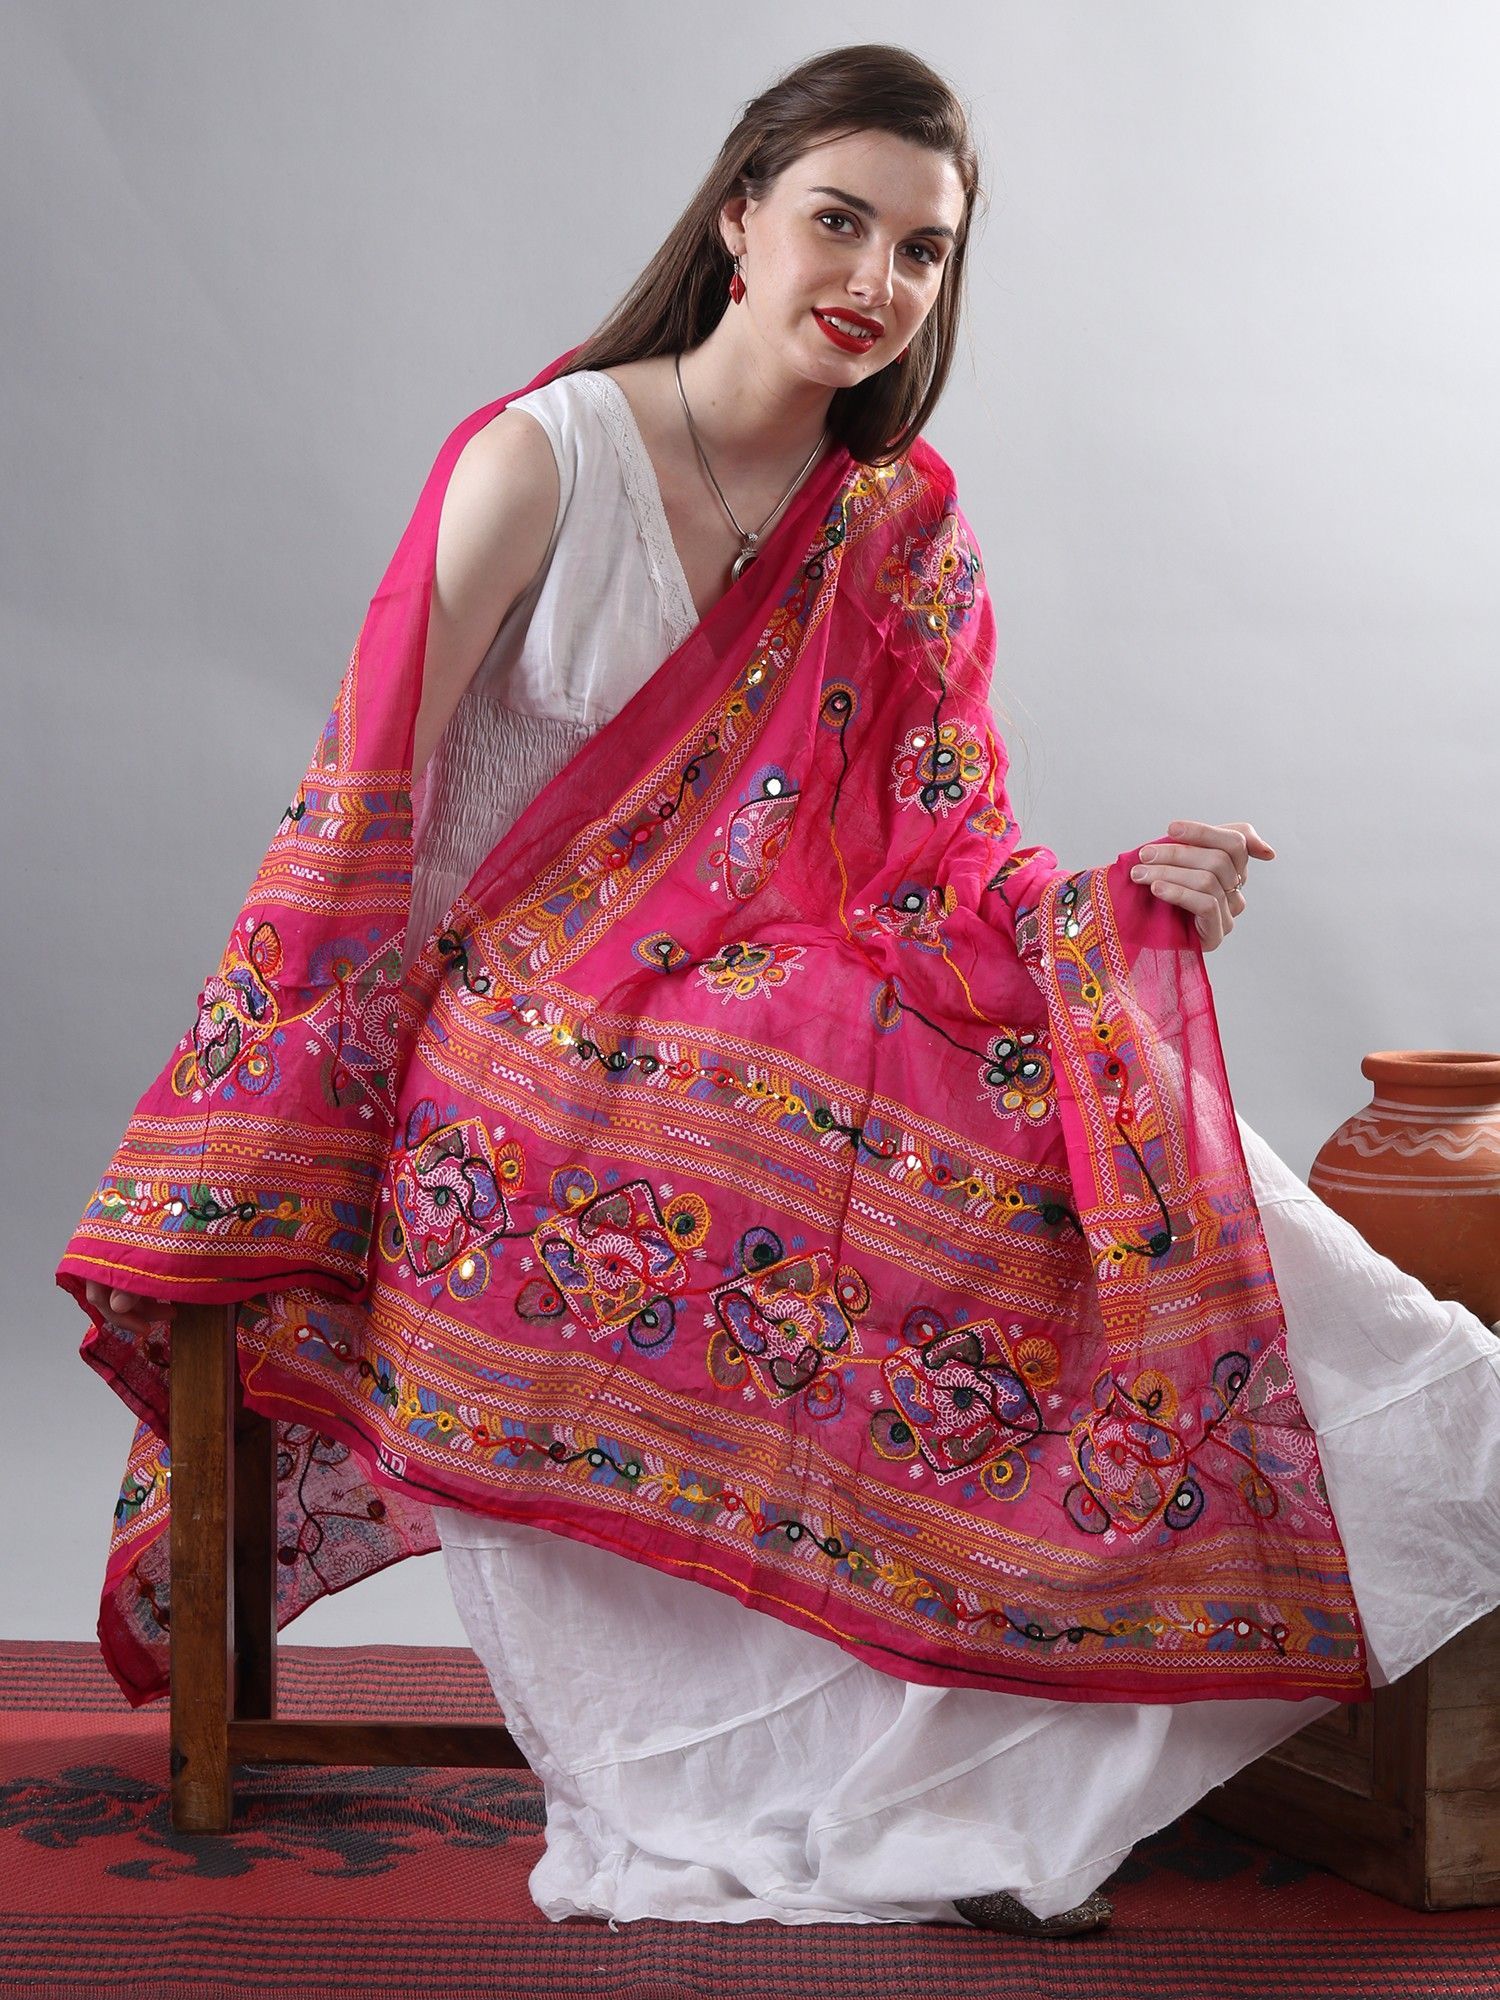 Fuchsia Printed Dupatta from Kutch with Hand-Embroidered Florals and Mirrors